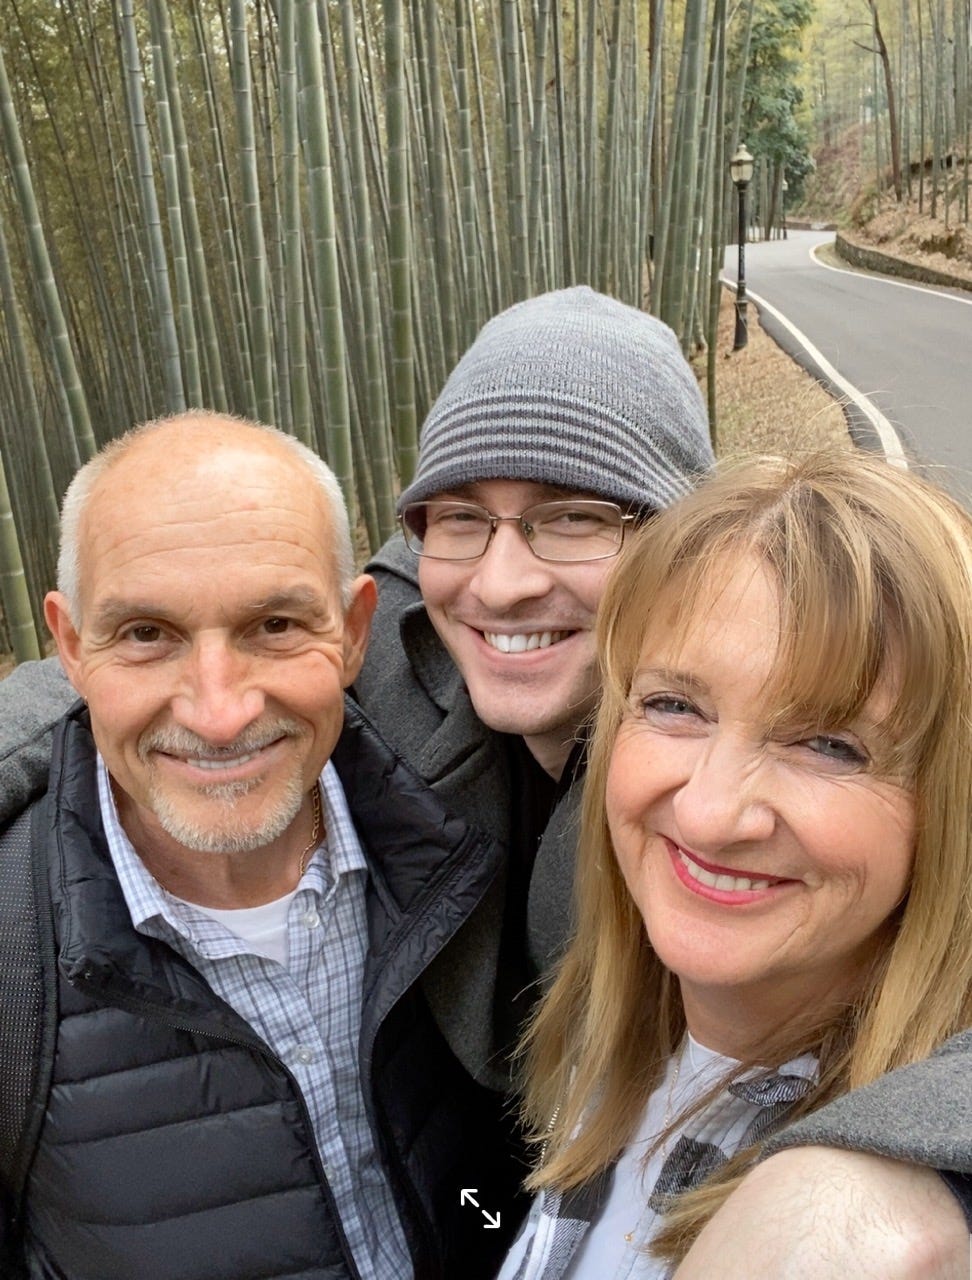 Claude and Ilona visit a national park with their son, Craig, on Jan. 22, 2020, before the lockdown began in Wuhan, China.